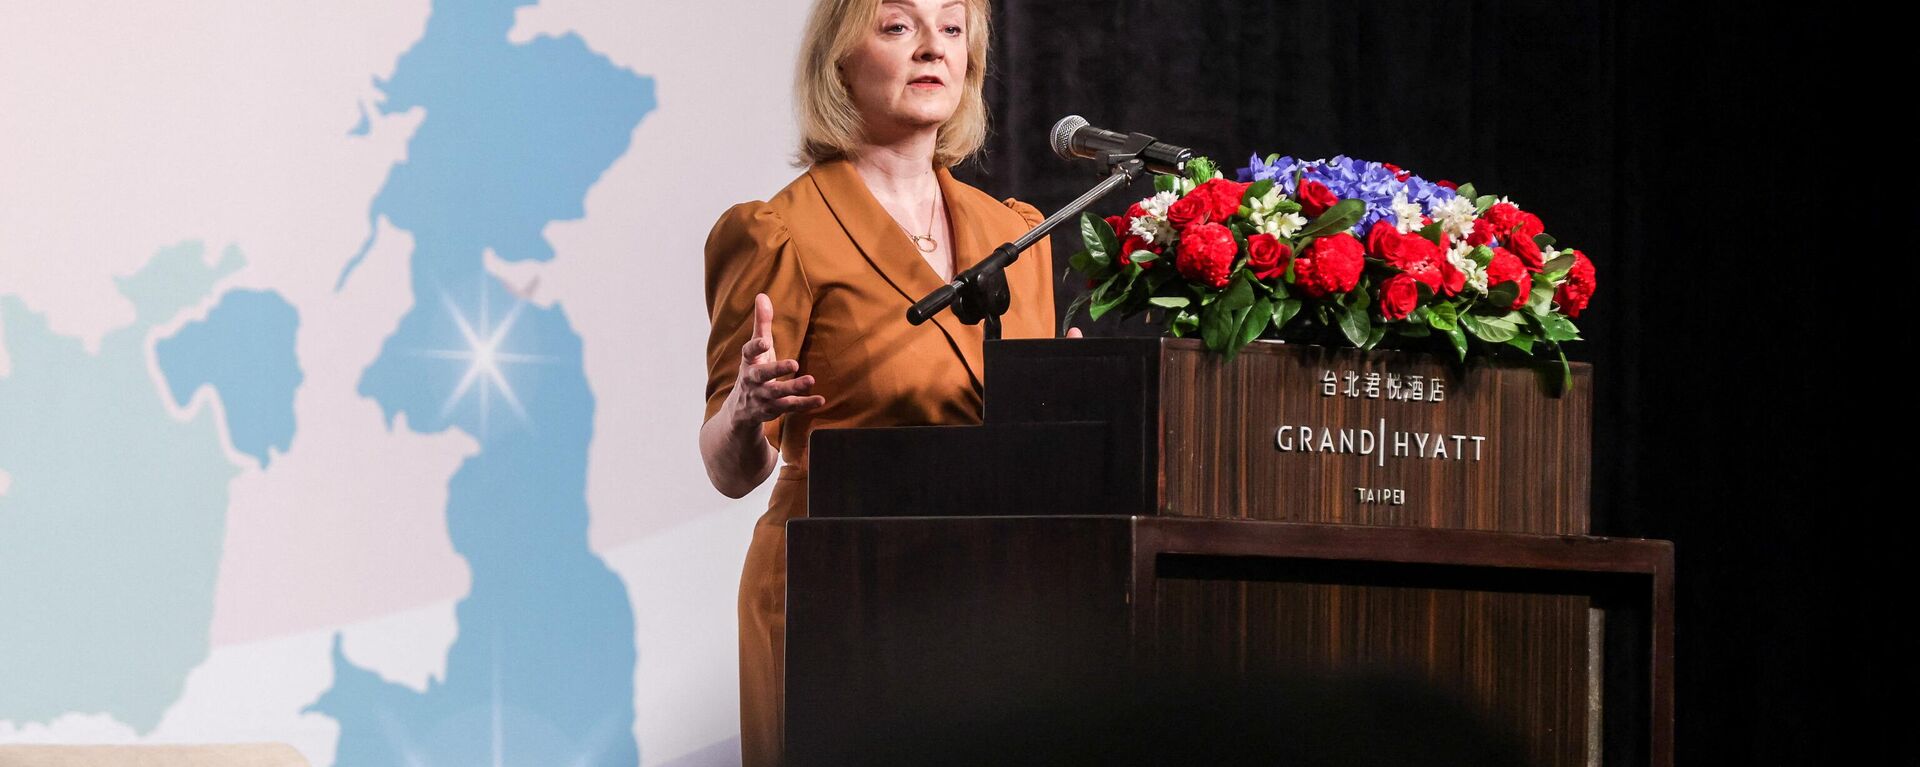 Britain's former prime minister Liz Truss delivers a speech as part of her five-day visit to Taiwan, in Taipei on May 17, 2023 - Sputnik International, 1920, 17.05.2023